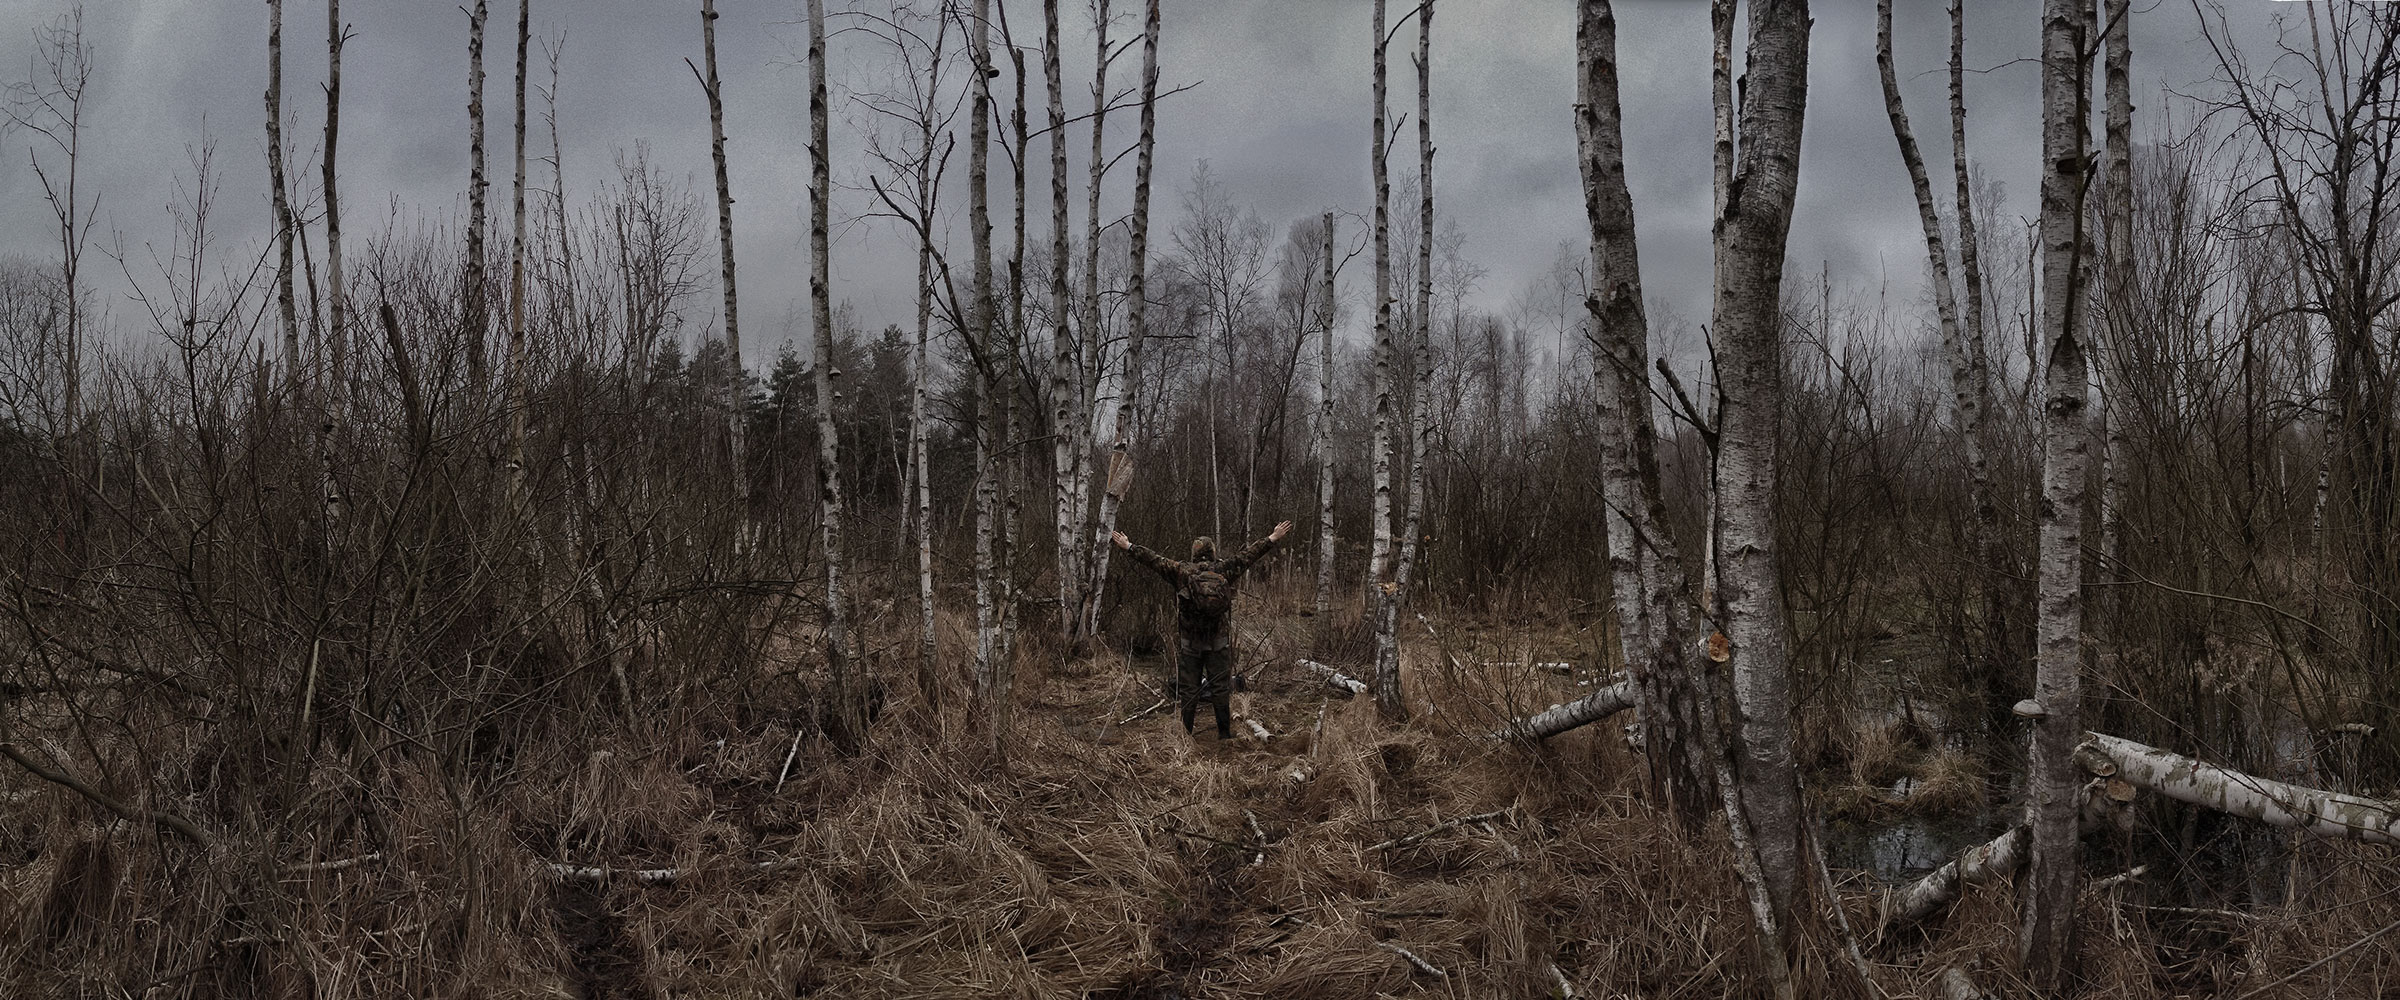 PANORAMA DIARY | Iphoneography blog | Autumn birch forest